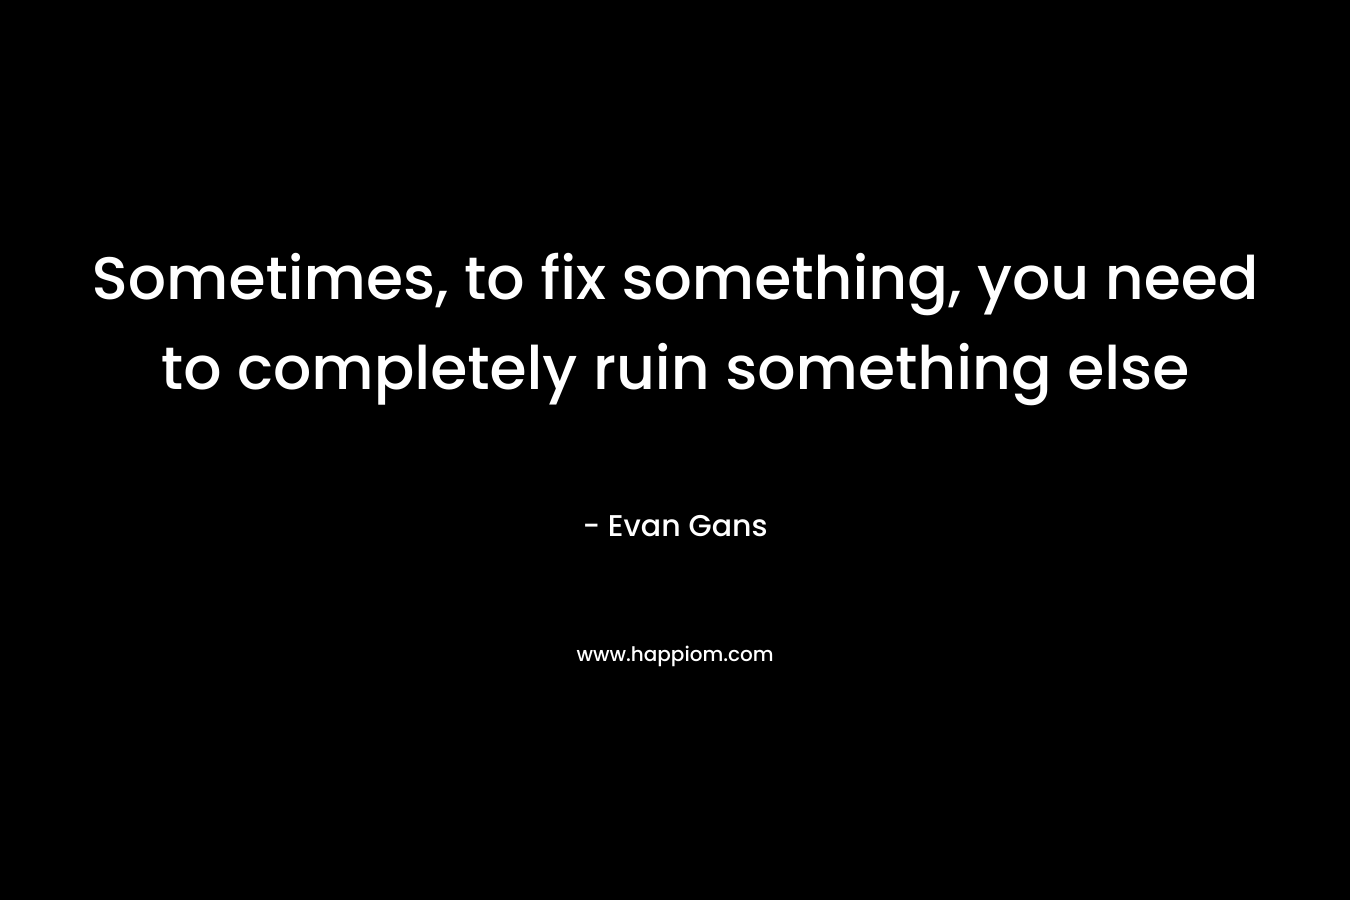 Sometimes, to fix something, you need to completely ruin something else – Evan Gans